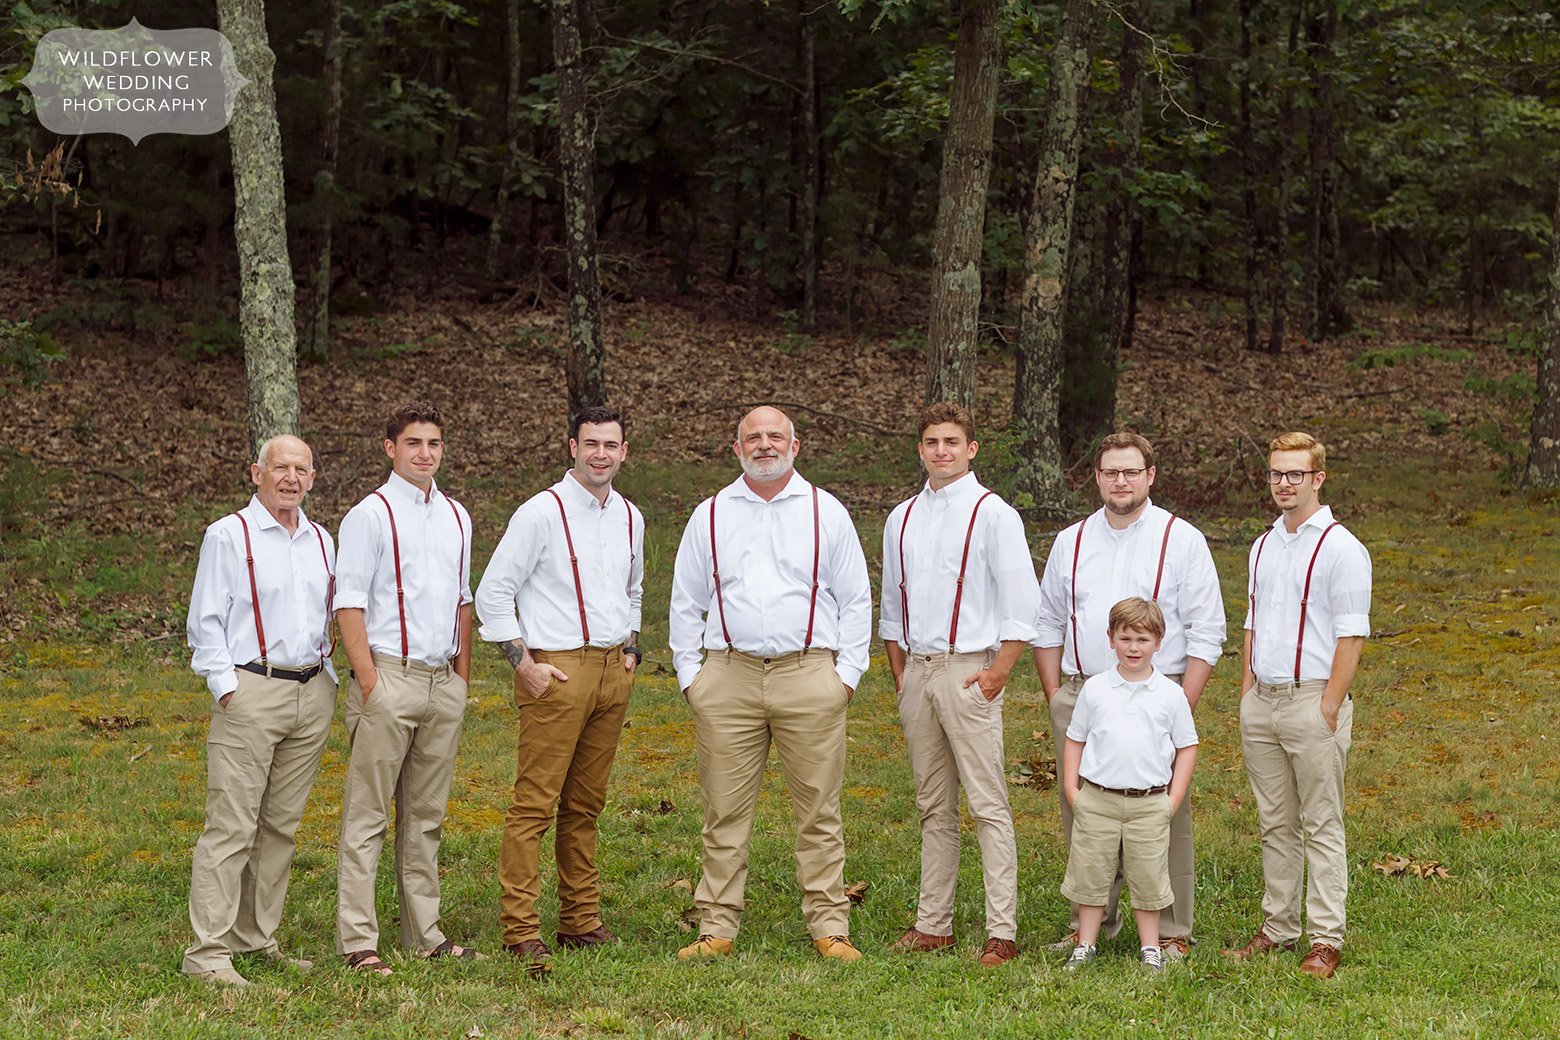 Simple groomsmen outfits at this backyard MO wedding.